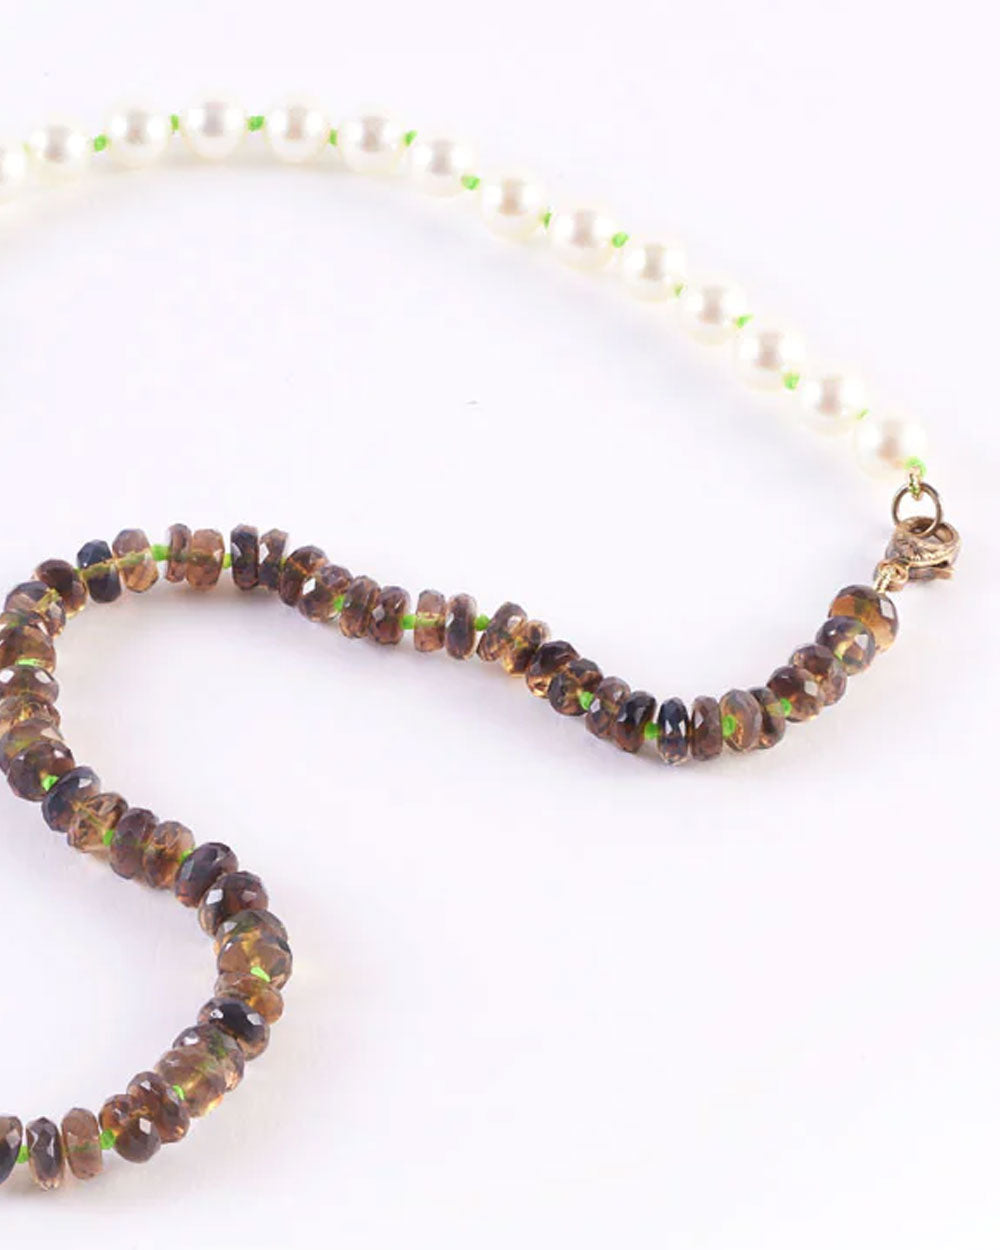 Akoya Pearl and Opal Bead Necklace